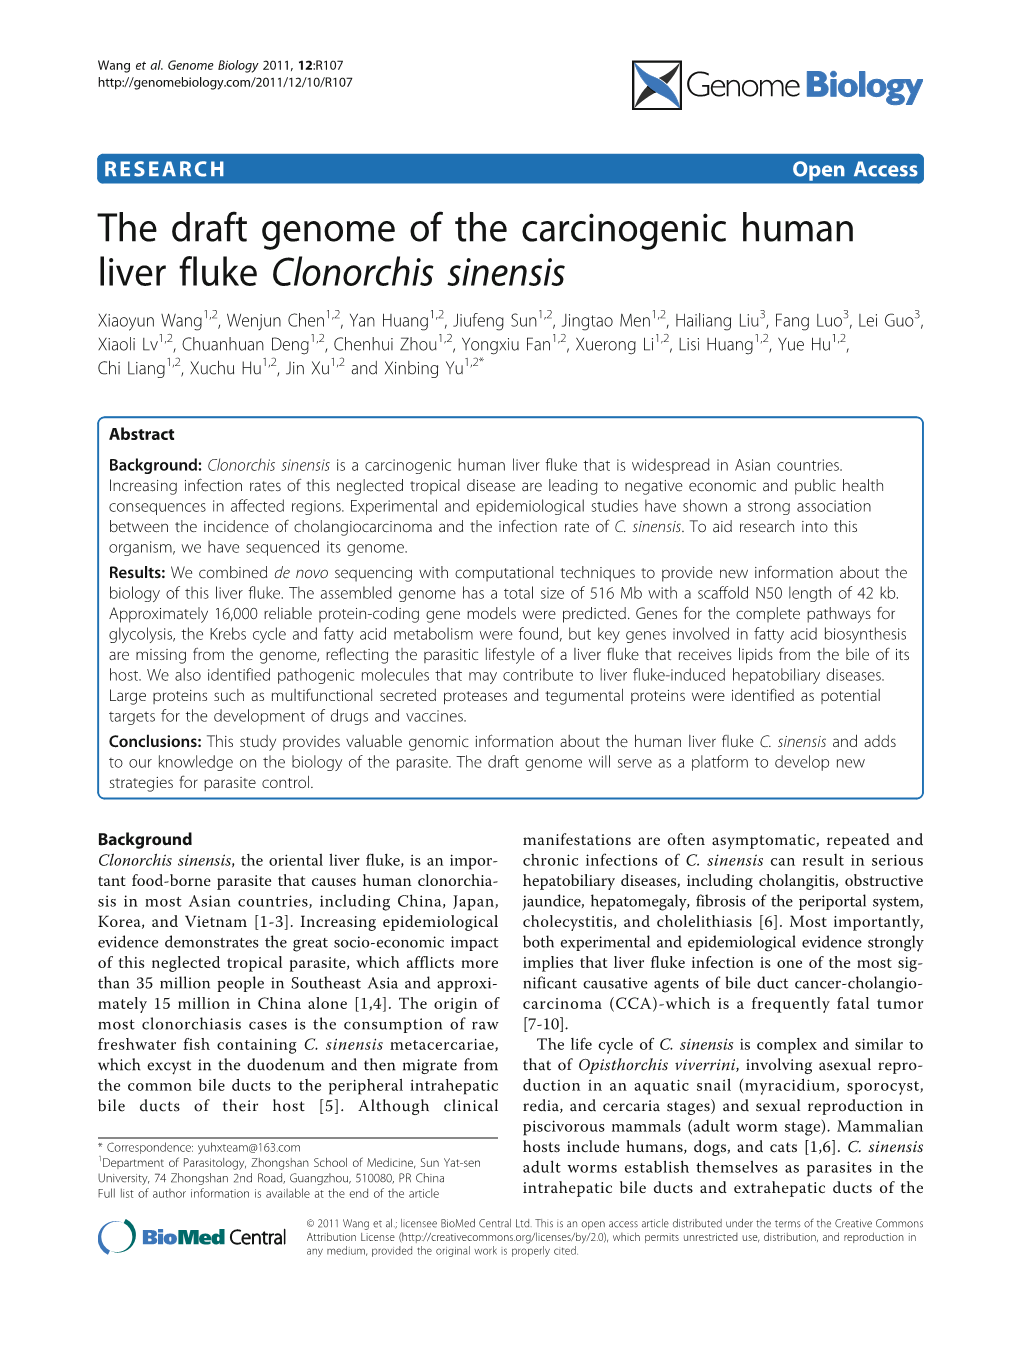 The Draft Genome of the Carcinogenic Human Liver Fluke Clonorchis Sinensis